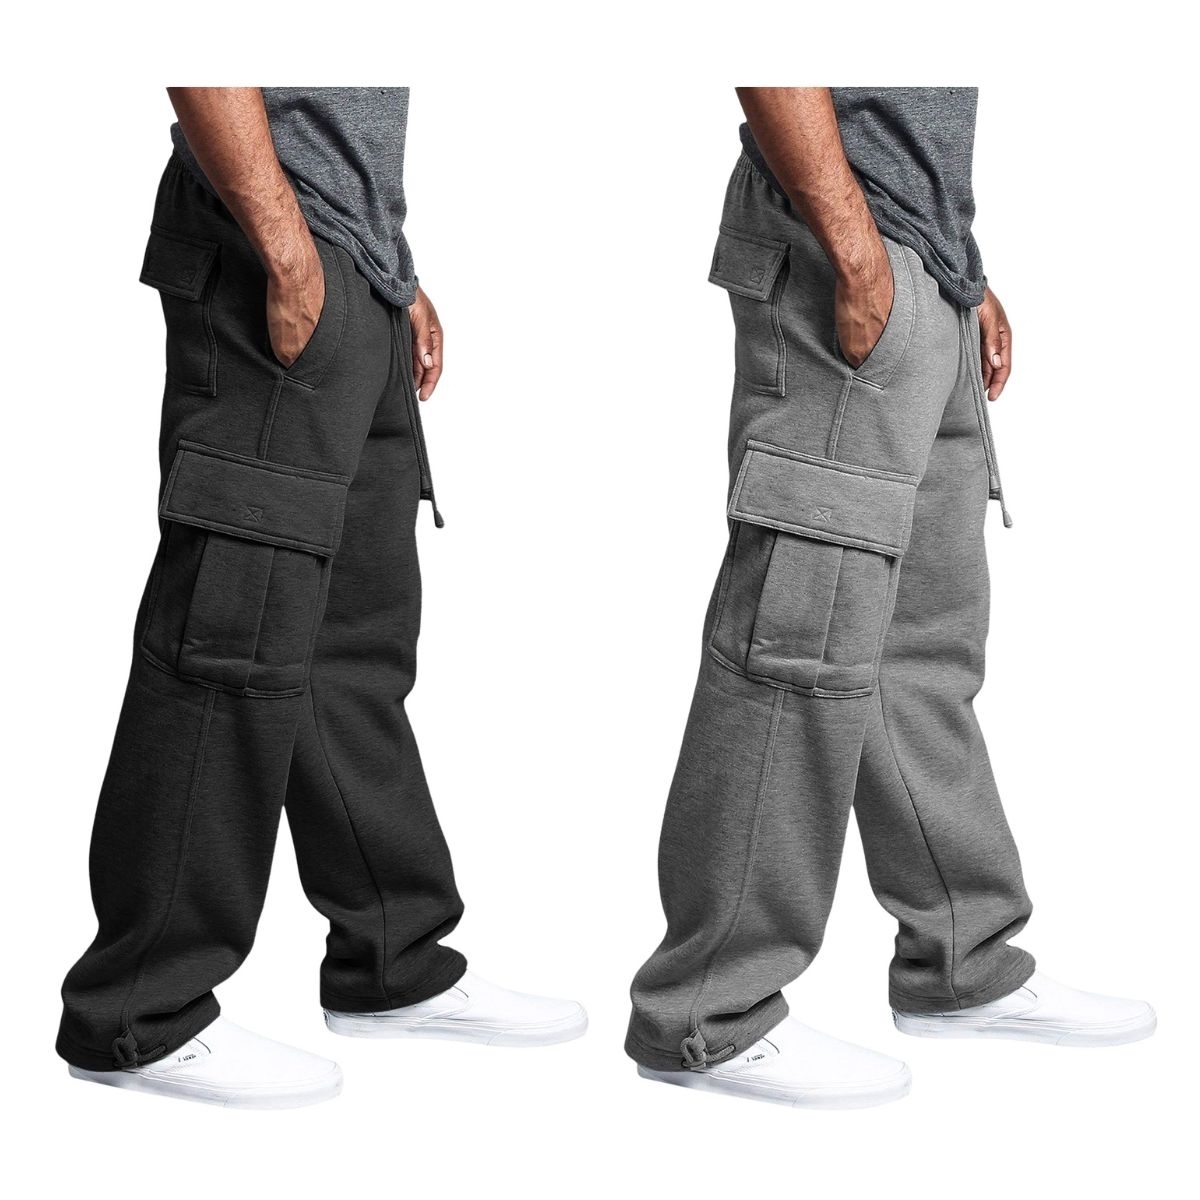 2-Pack: Men's Casual Solid Fleece Lined Cargo Jogger Soft Sweatpants With Pockets - Black&grey, Large